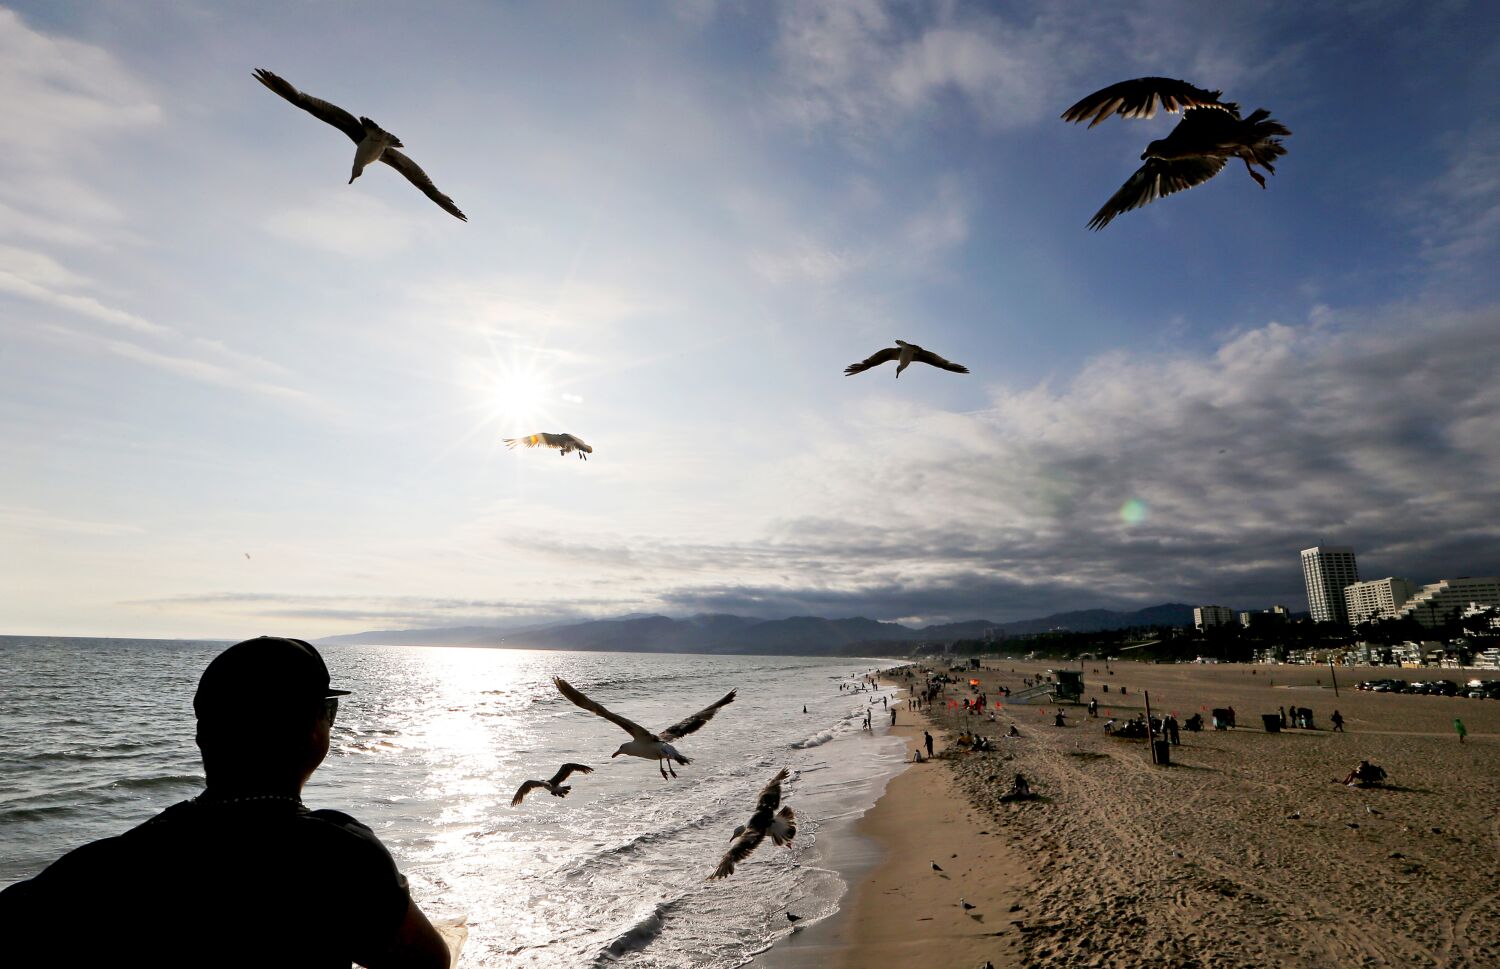 Will June gloom go away in time for a sunny Father's Day?